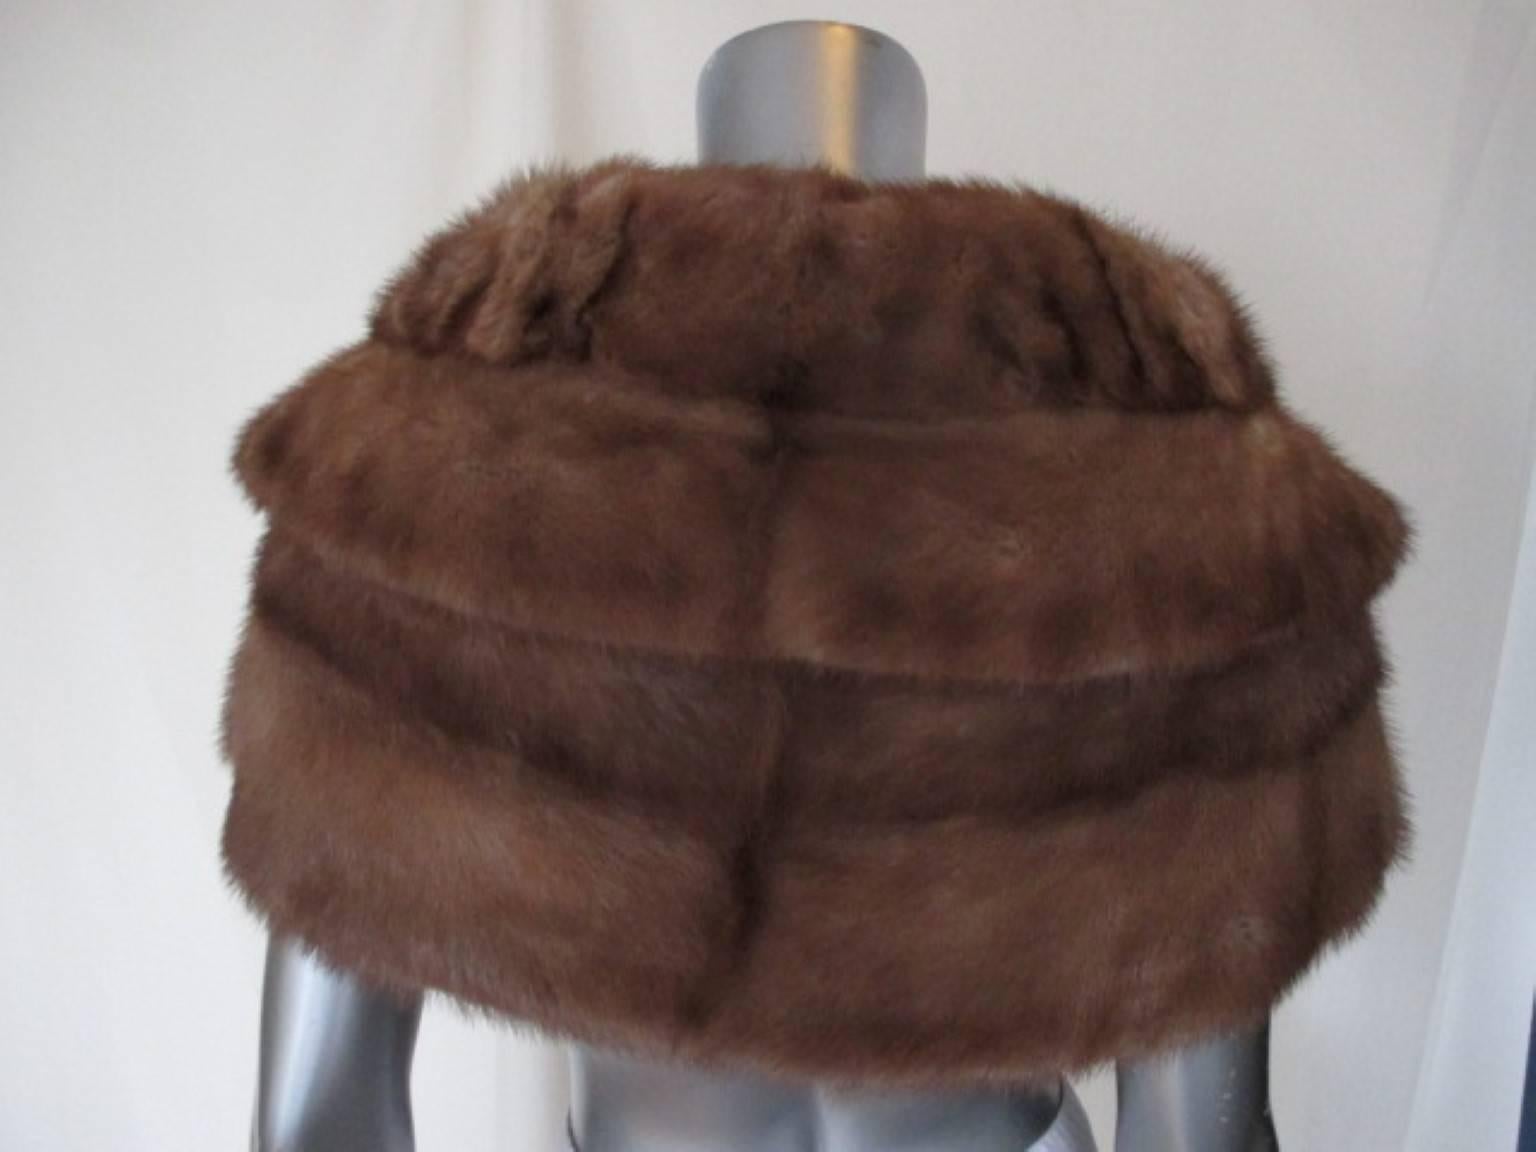 This vintage mink fur stole has 1 closing hook and an inside pocket.
Made by M. Whitmore. Montreal, Canada.
The stole is nice to wear on a coat or evening dress.

